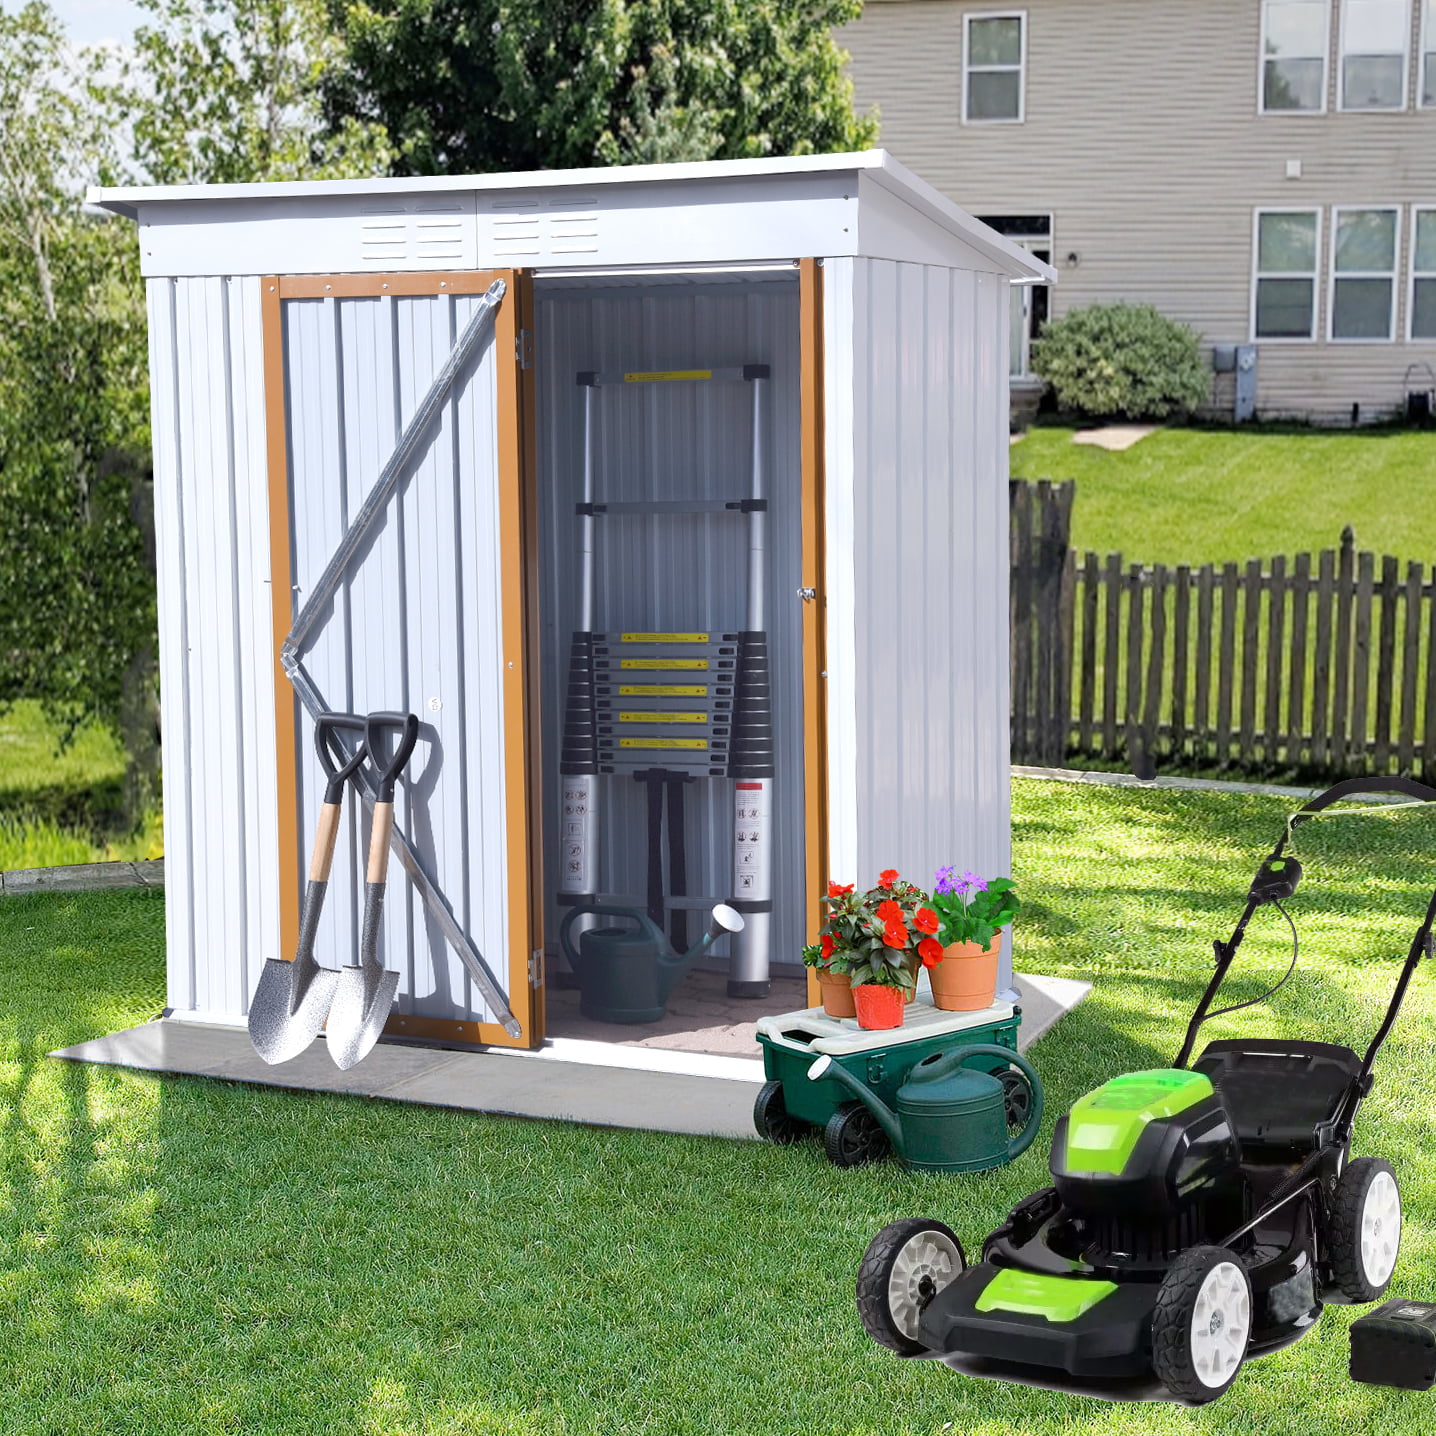 Storage Shed For Backyard 30 Garden Shed Ideas For The Ultimate